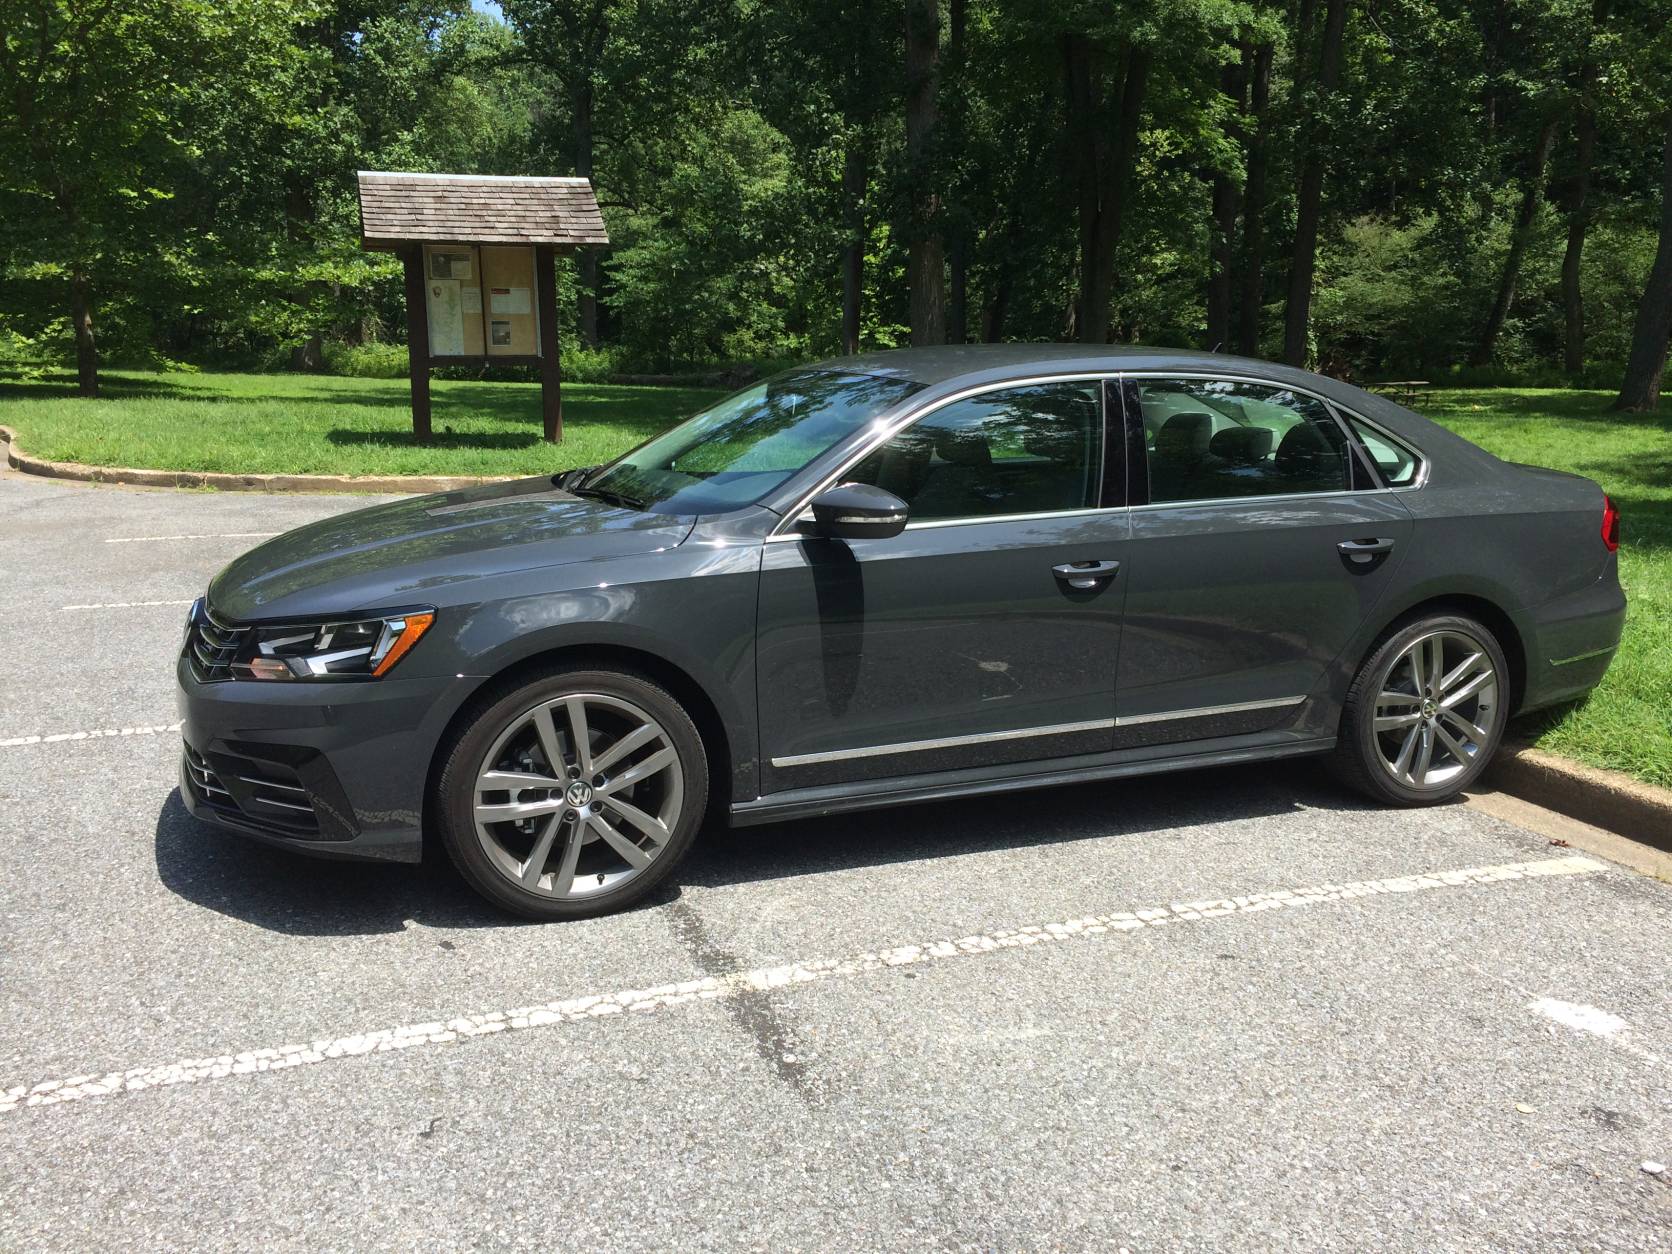 The Passat gets a shot sport with R-Line package - WTOP